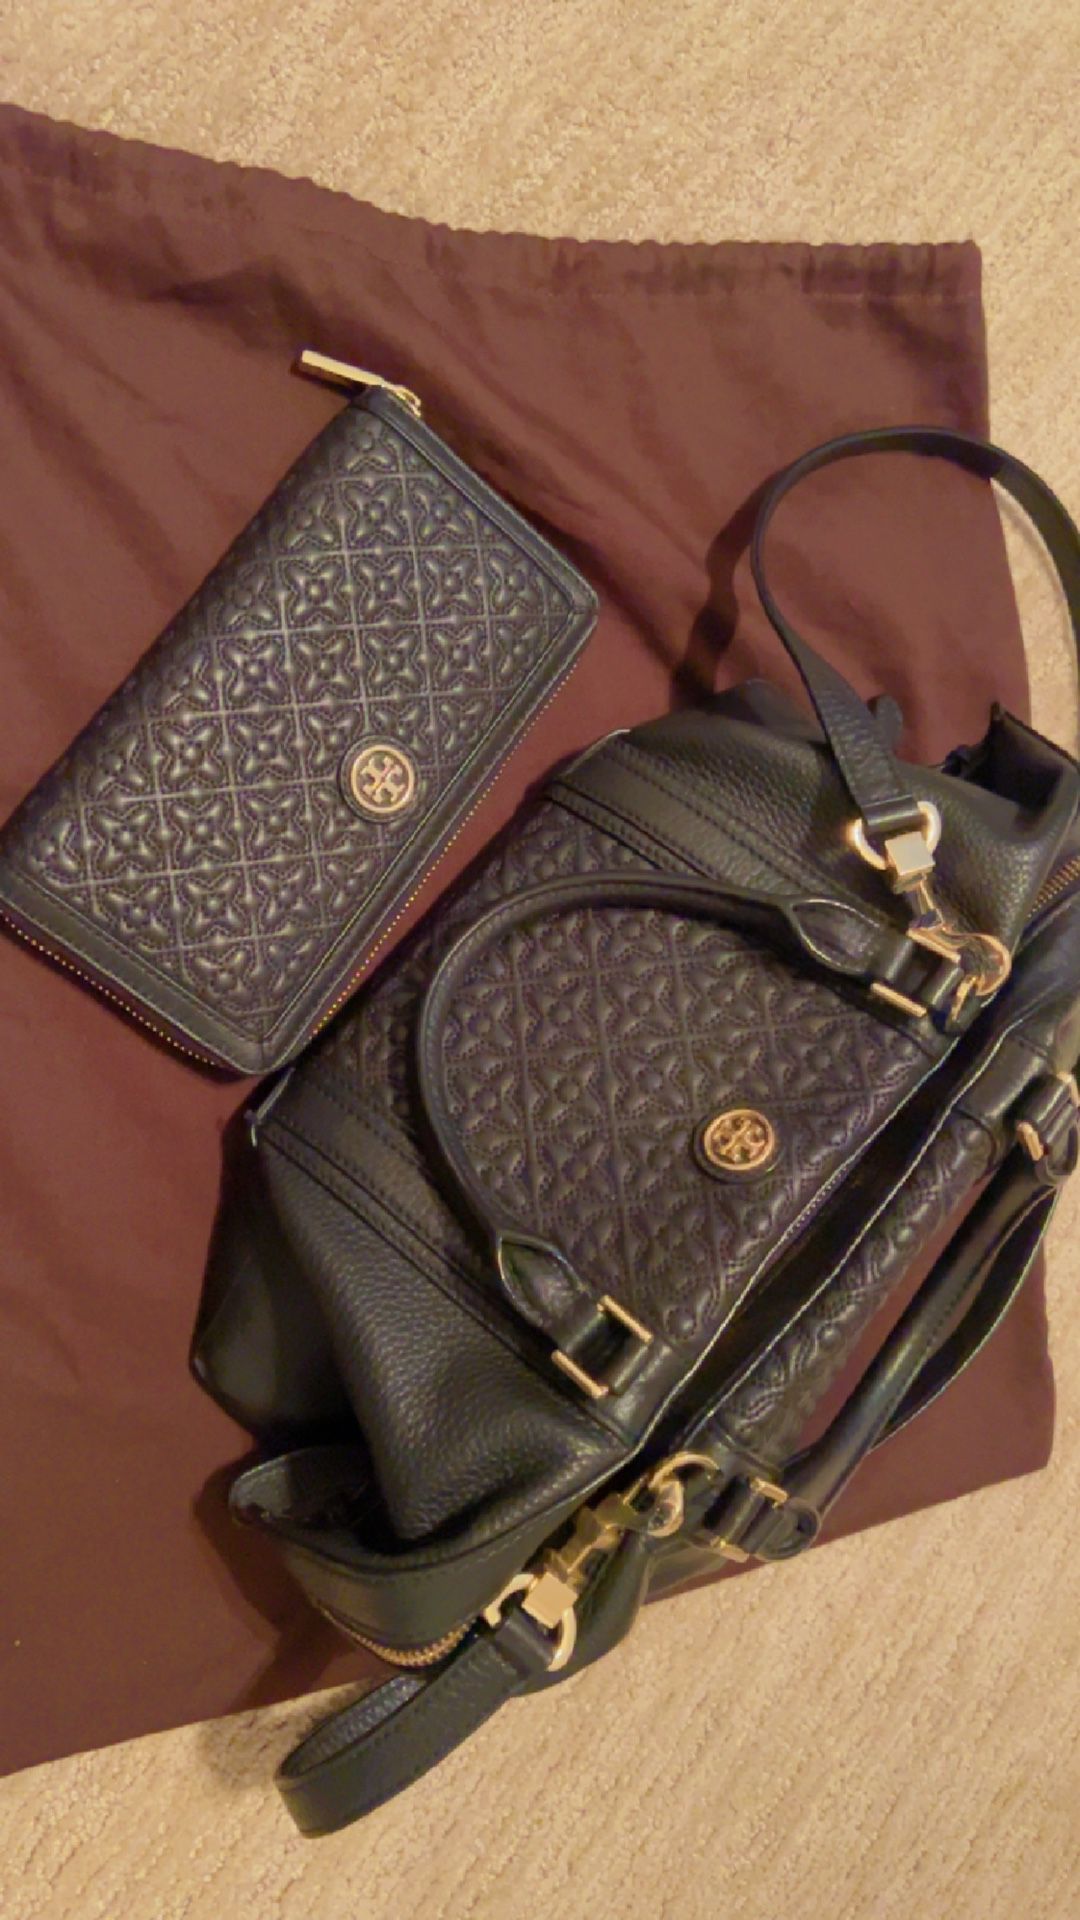 Tory Burch Bag And Wallet Value At $200 Selling It For $75